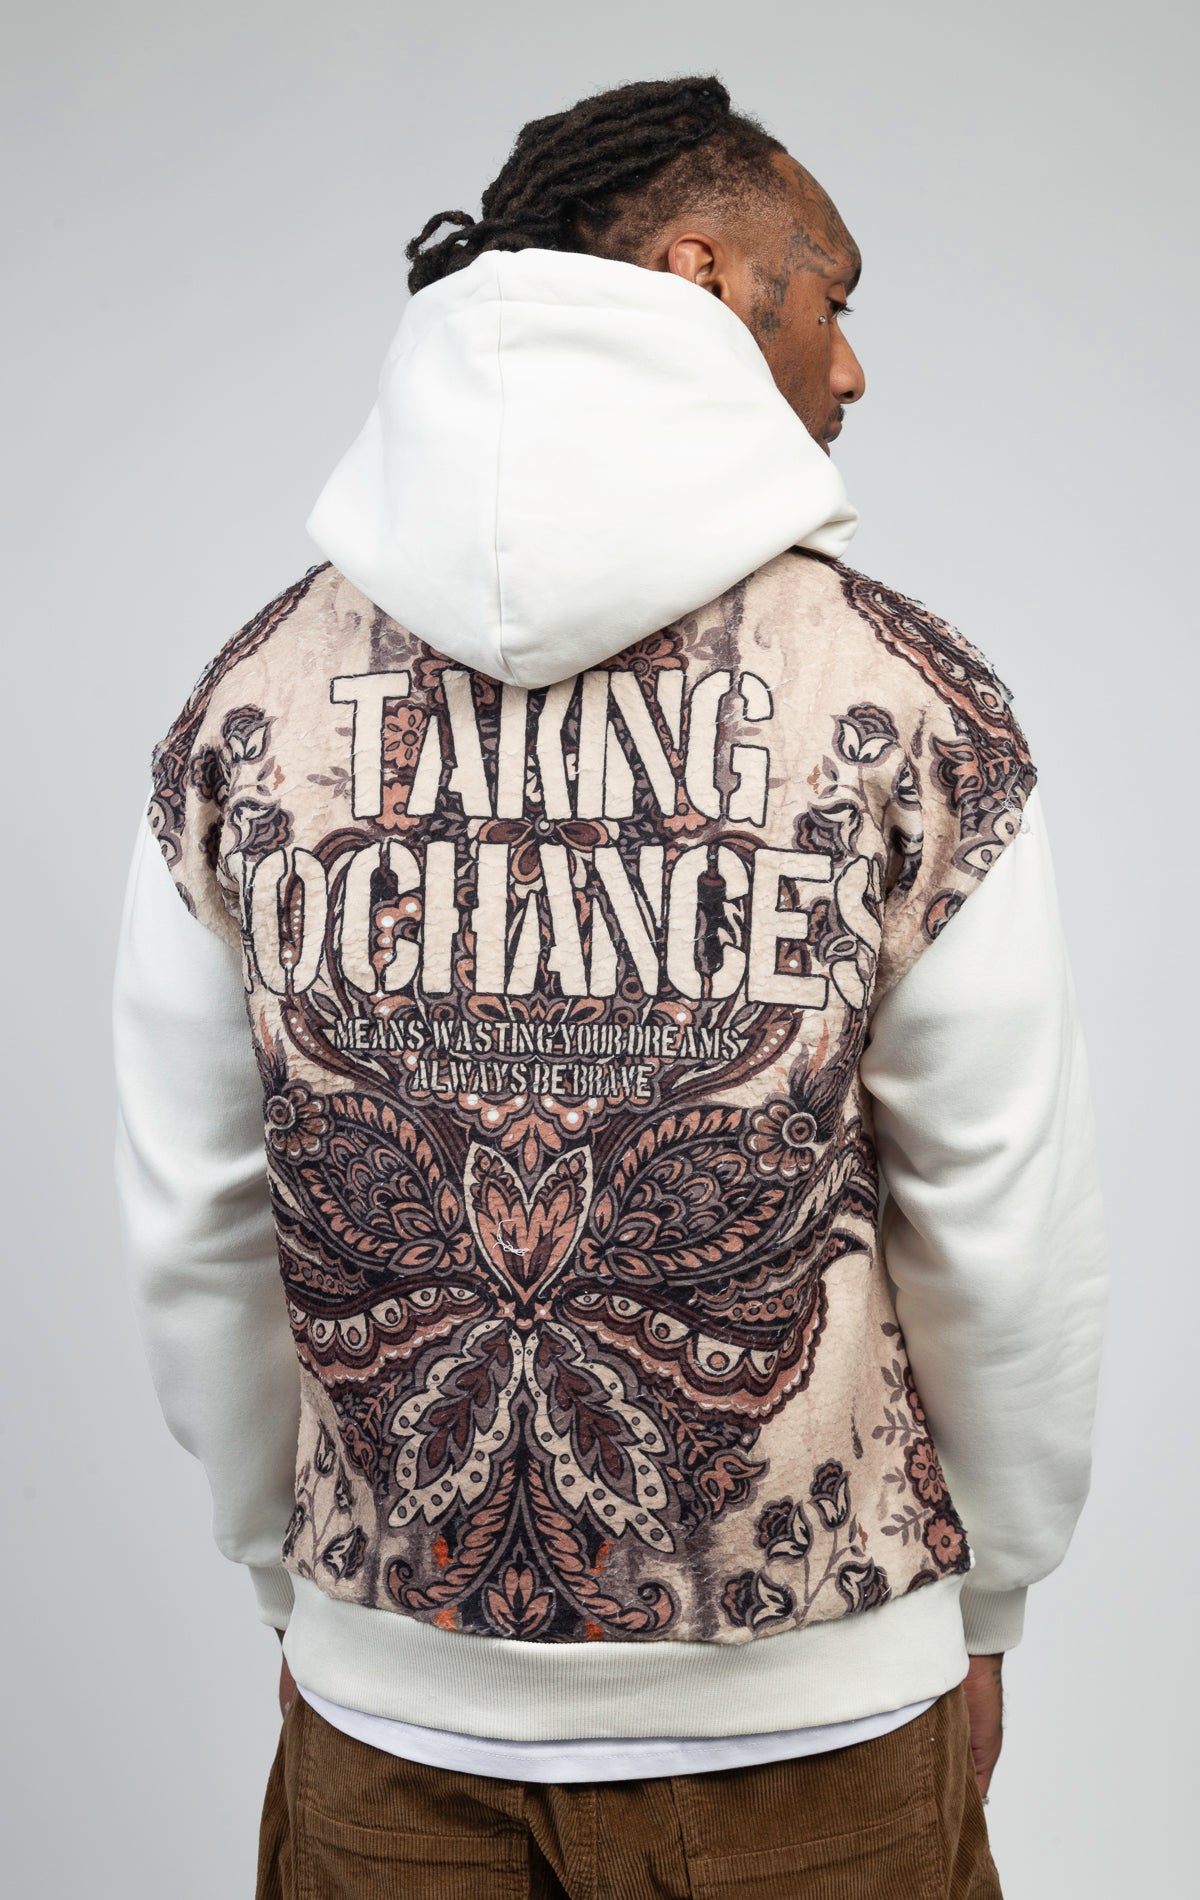 A soft and breathable oversized hoodie featuring vibrant and unique printed "TAKING NO CHANCES" designs on the back.